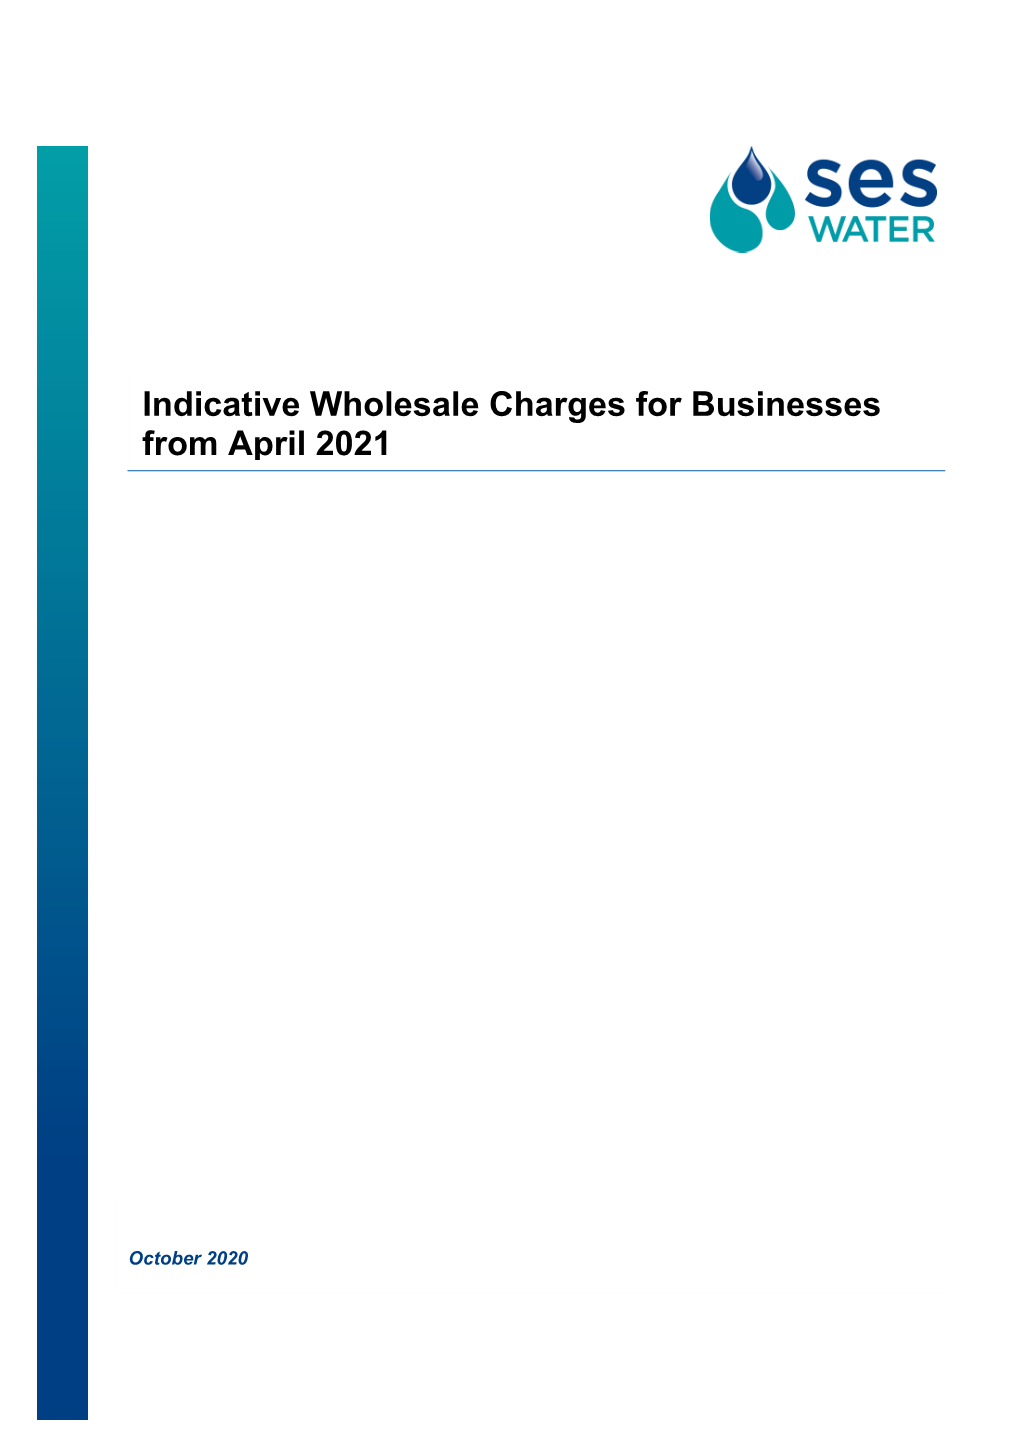 Indicative Wholesale Charges for Businesses from April 2021